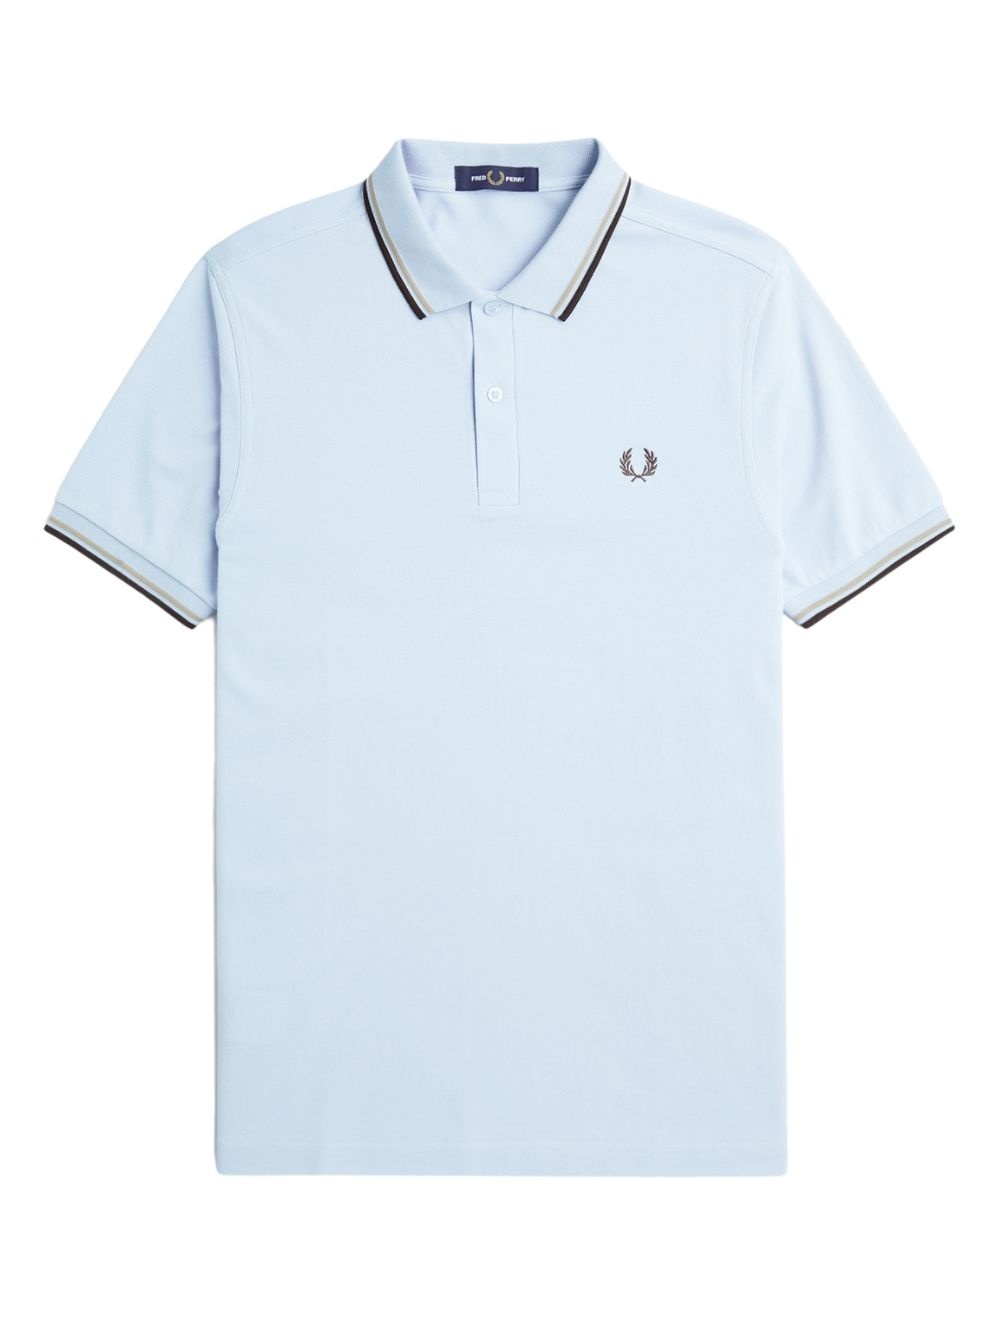 FP TWIN TIPPED FRED PERRY SHIRT - 1